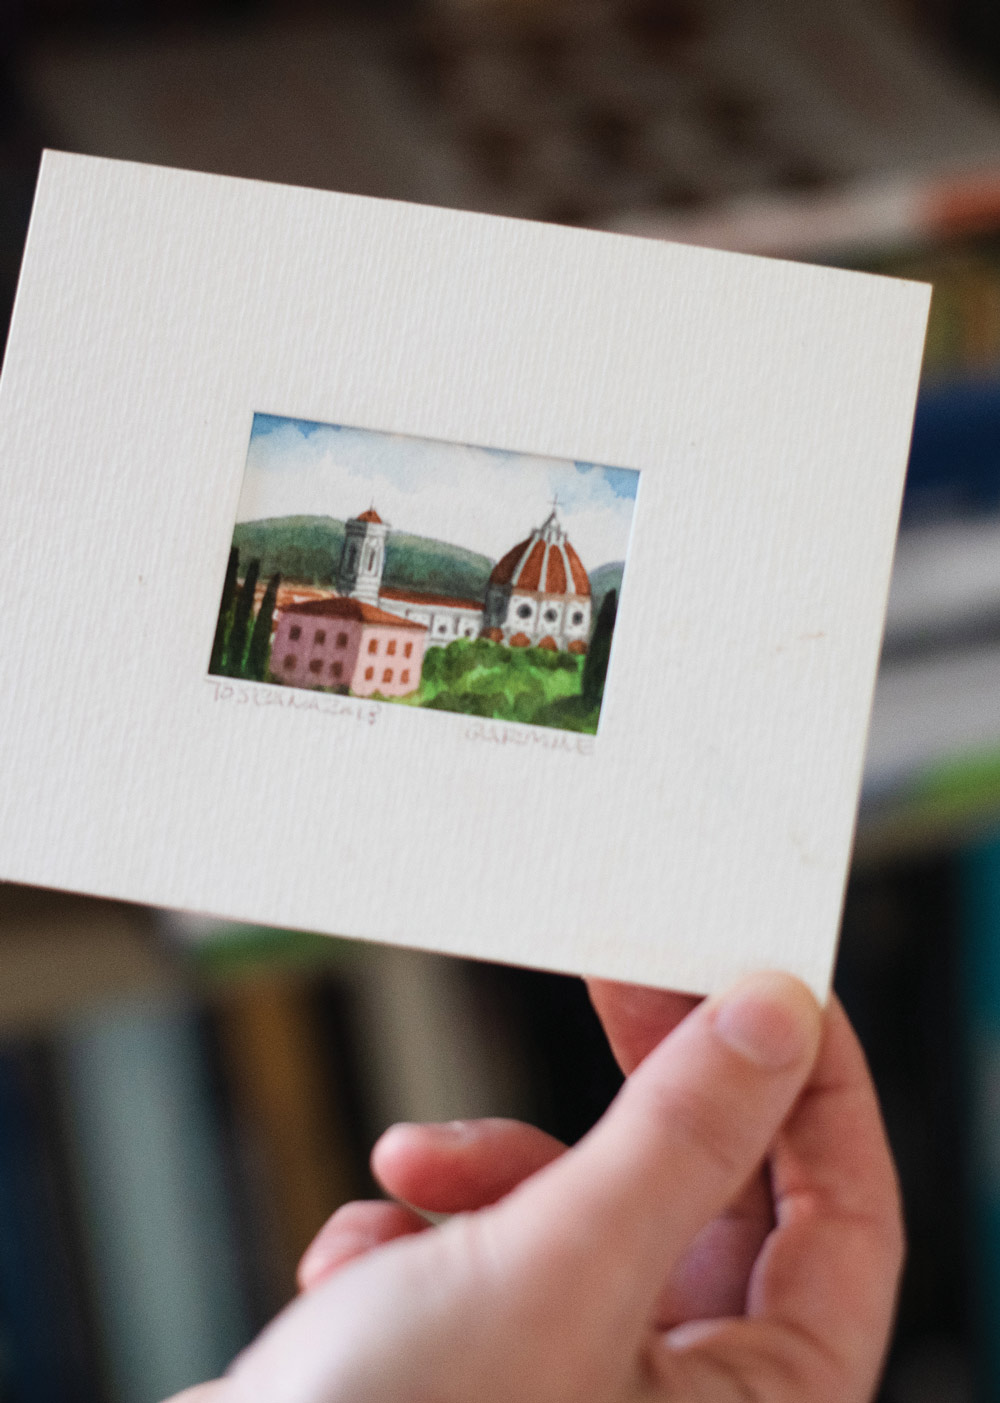 a card with a small painting of an Italian city in the center is held in hand